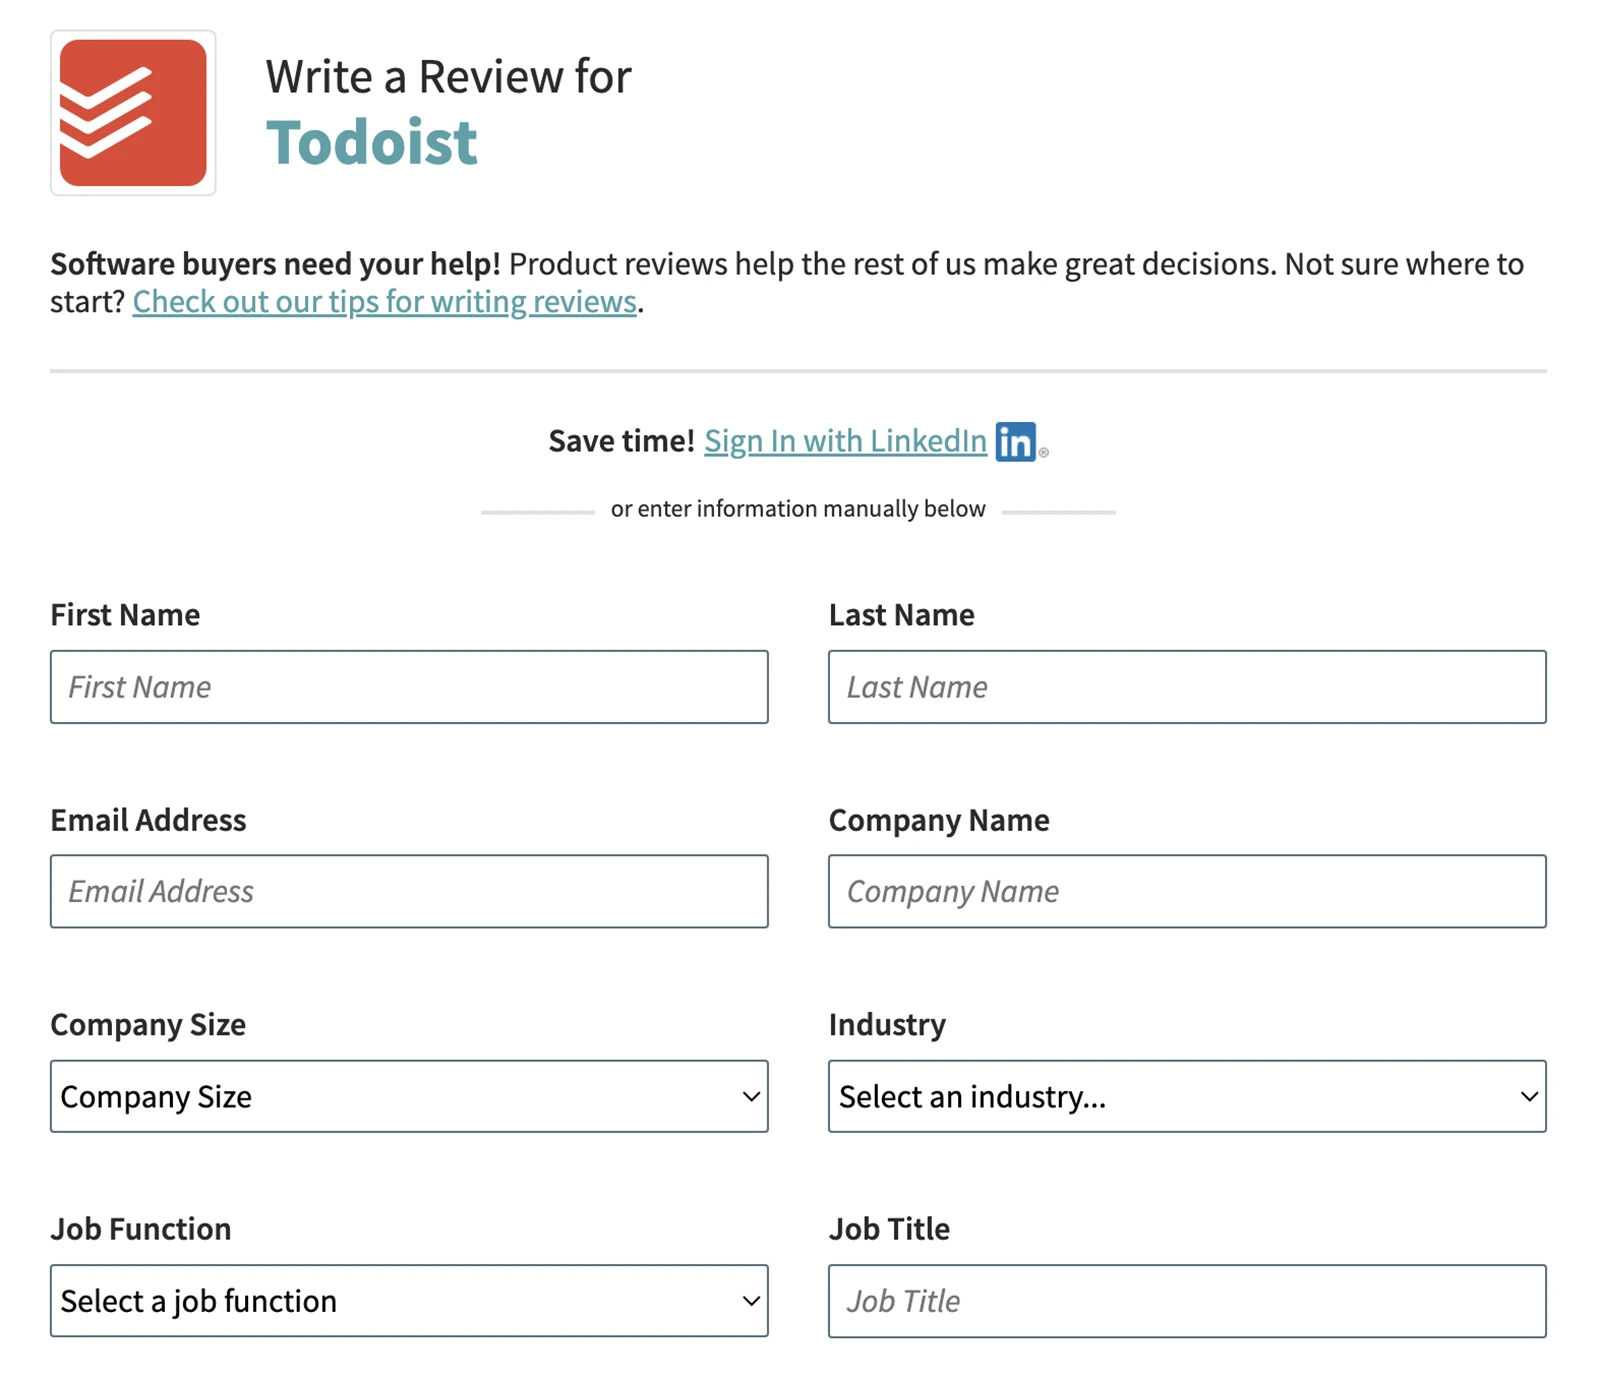 Write a Review for Todoist image